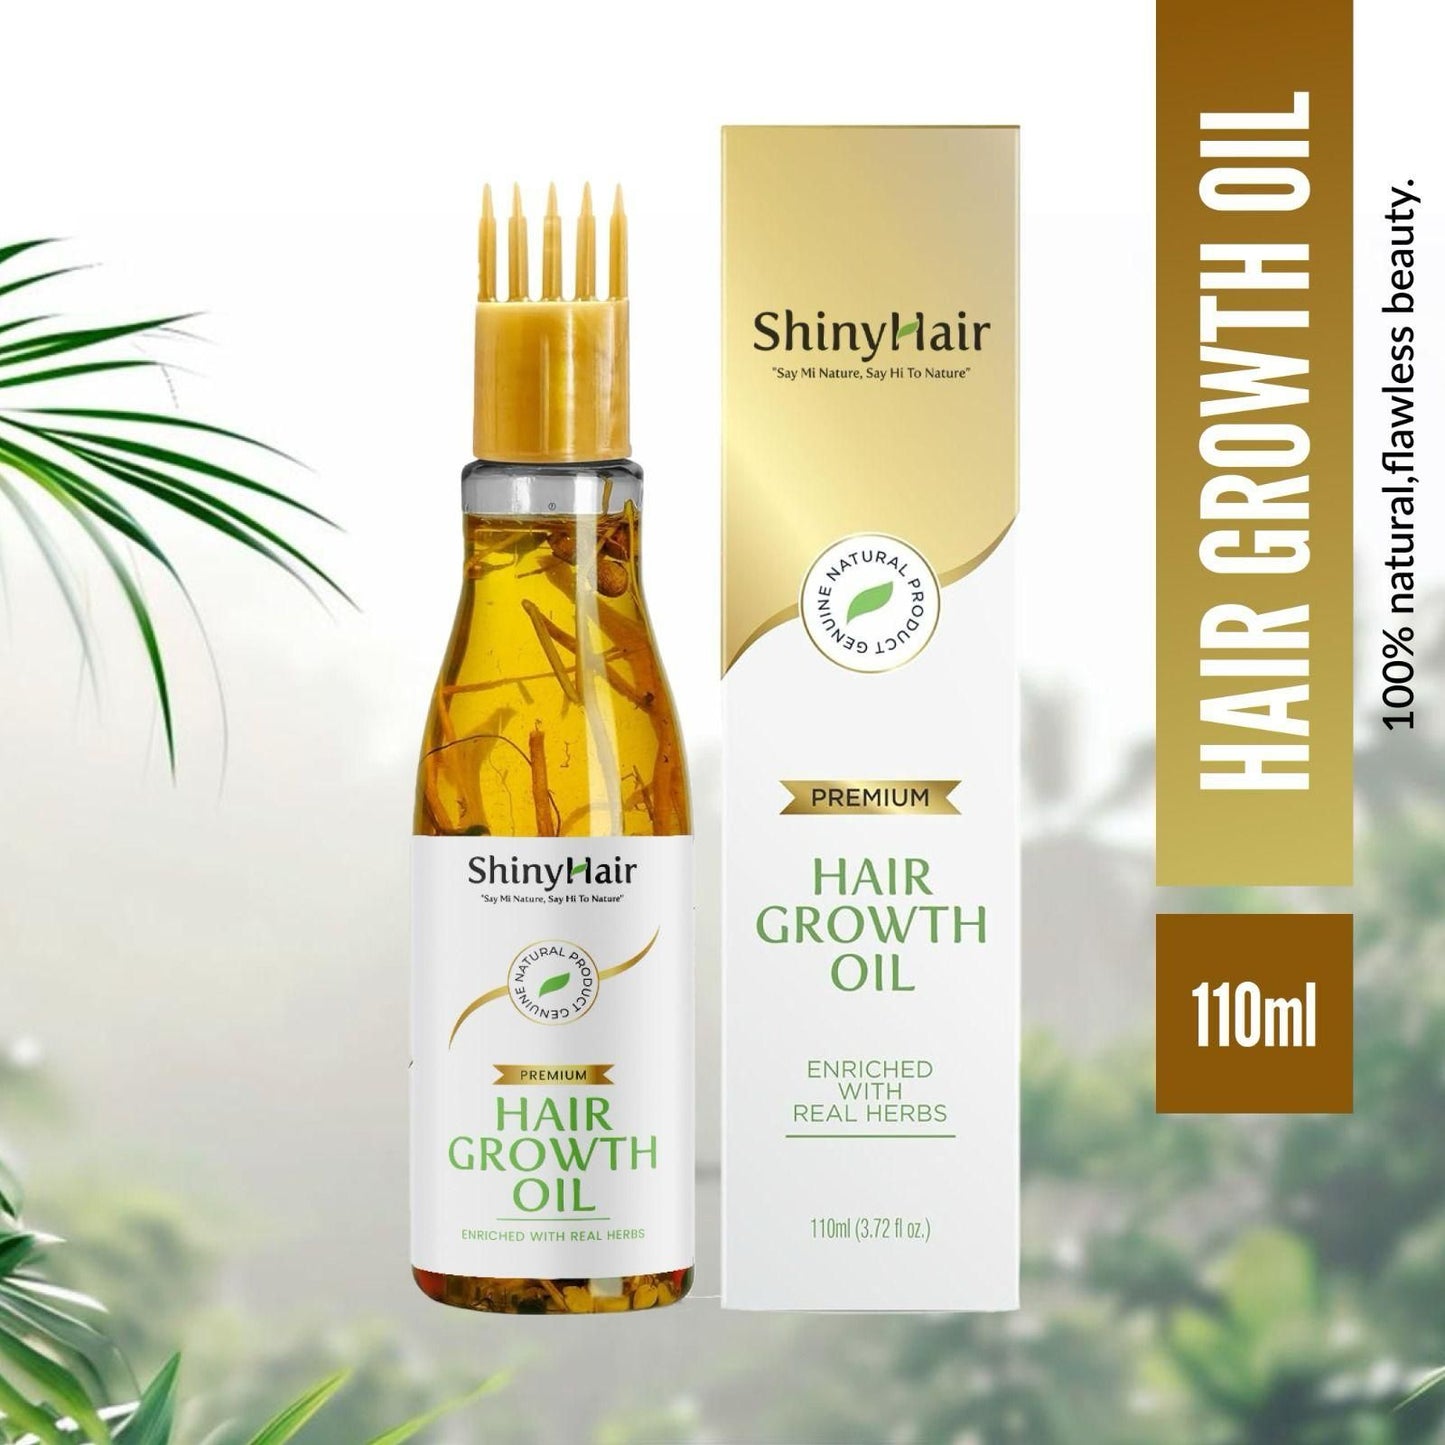 ShinyHair Growth Oil Enriched With Real Herbs 110ml – ALL I NEED!